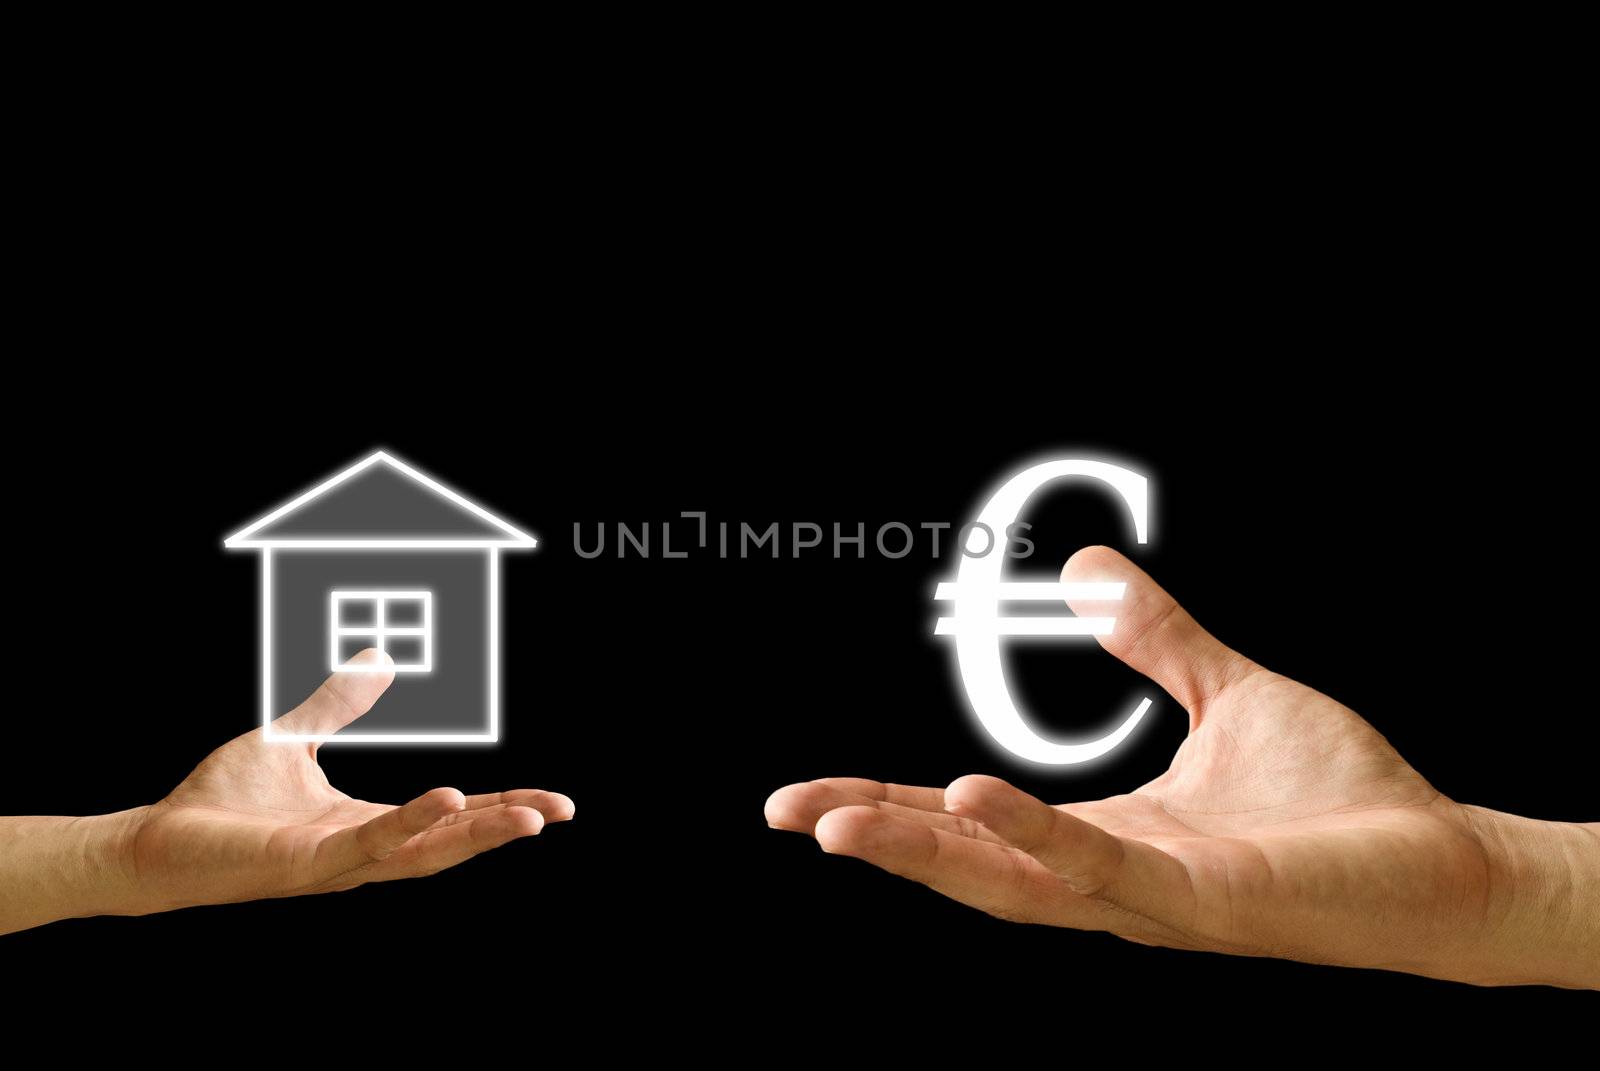 Small hand exchange Euro icon with house icon from big hand by pixbox77